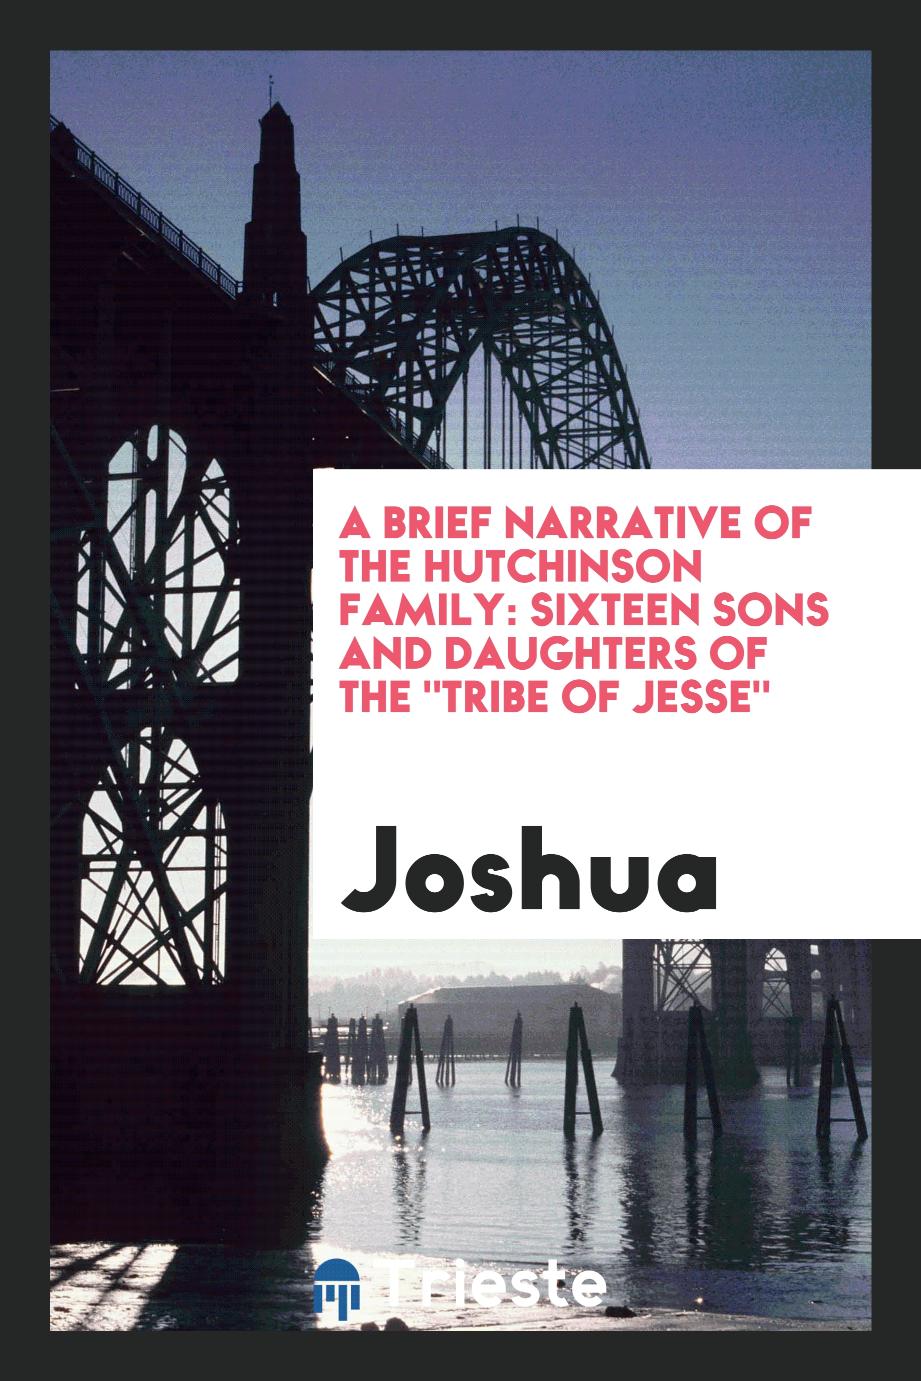 Joshua - A Brief Narrative of the Hutchinson Family: Sixteen Sons and Daughters of the "tribe of Jesse"